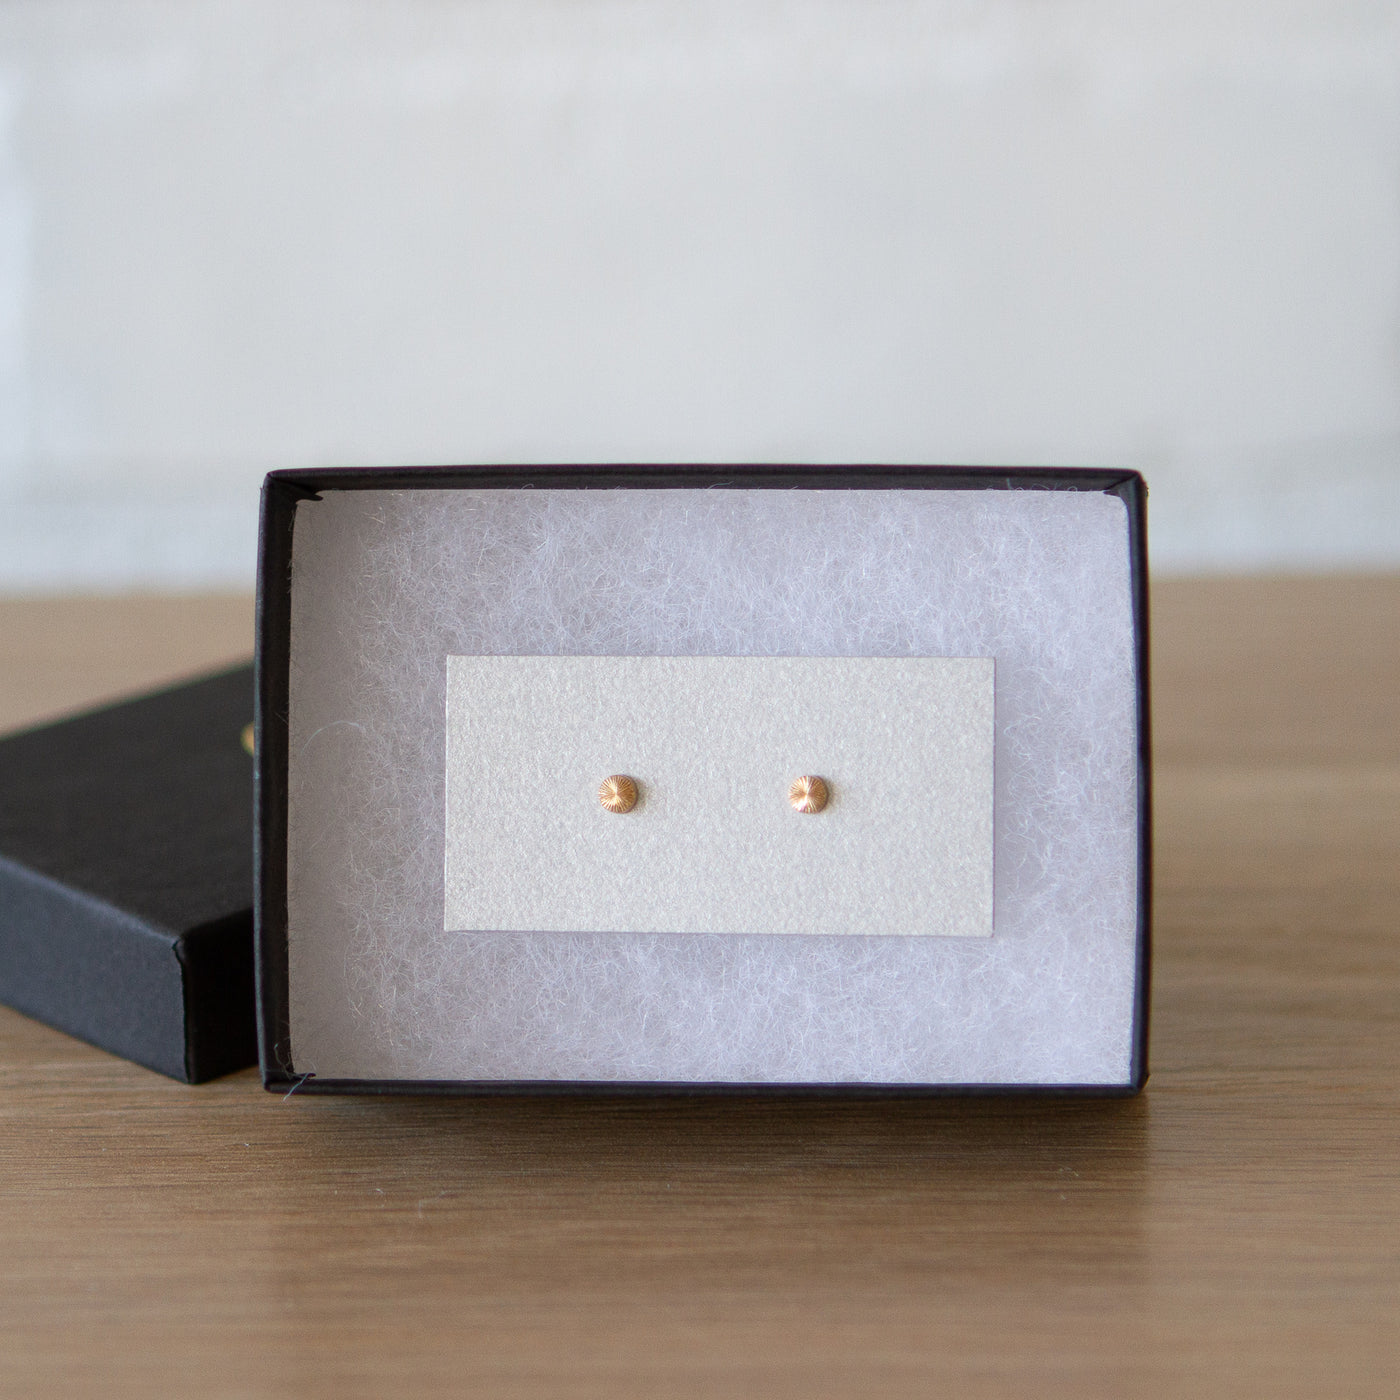 Tiny engraved gold stud earring by Corey Egan in a gift box